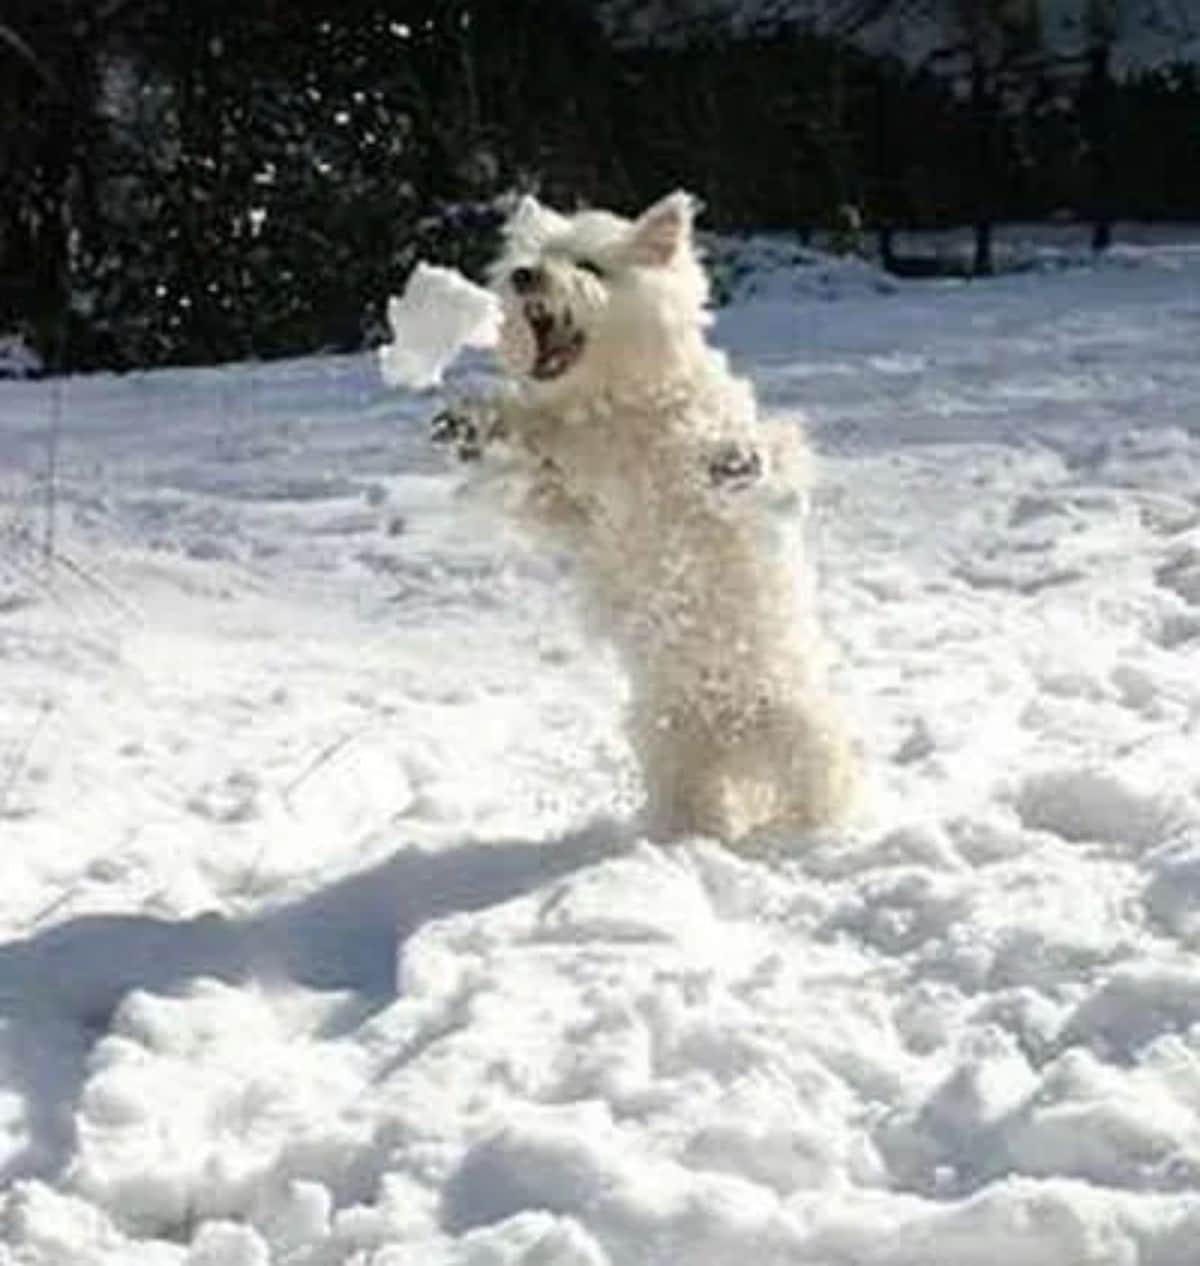 small fluffy white dog on hind legs on snow and trying to catch a snowball